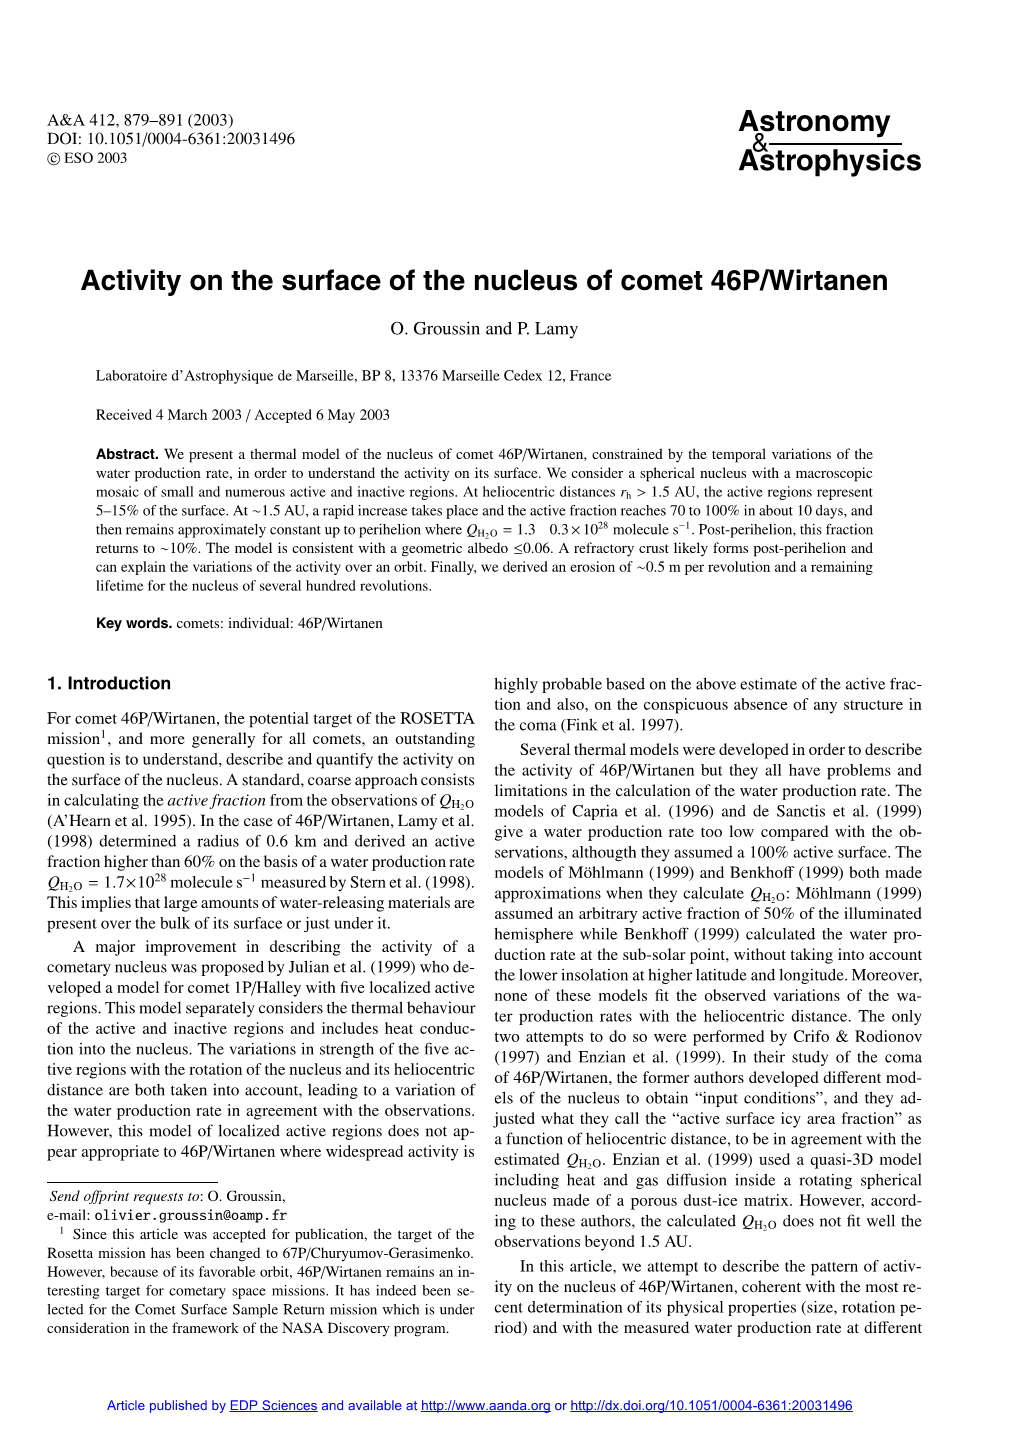 Activity on the Surface of the Nucleus of Comet 46P/Wirtanen